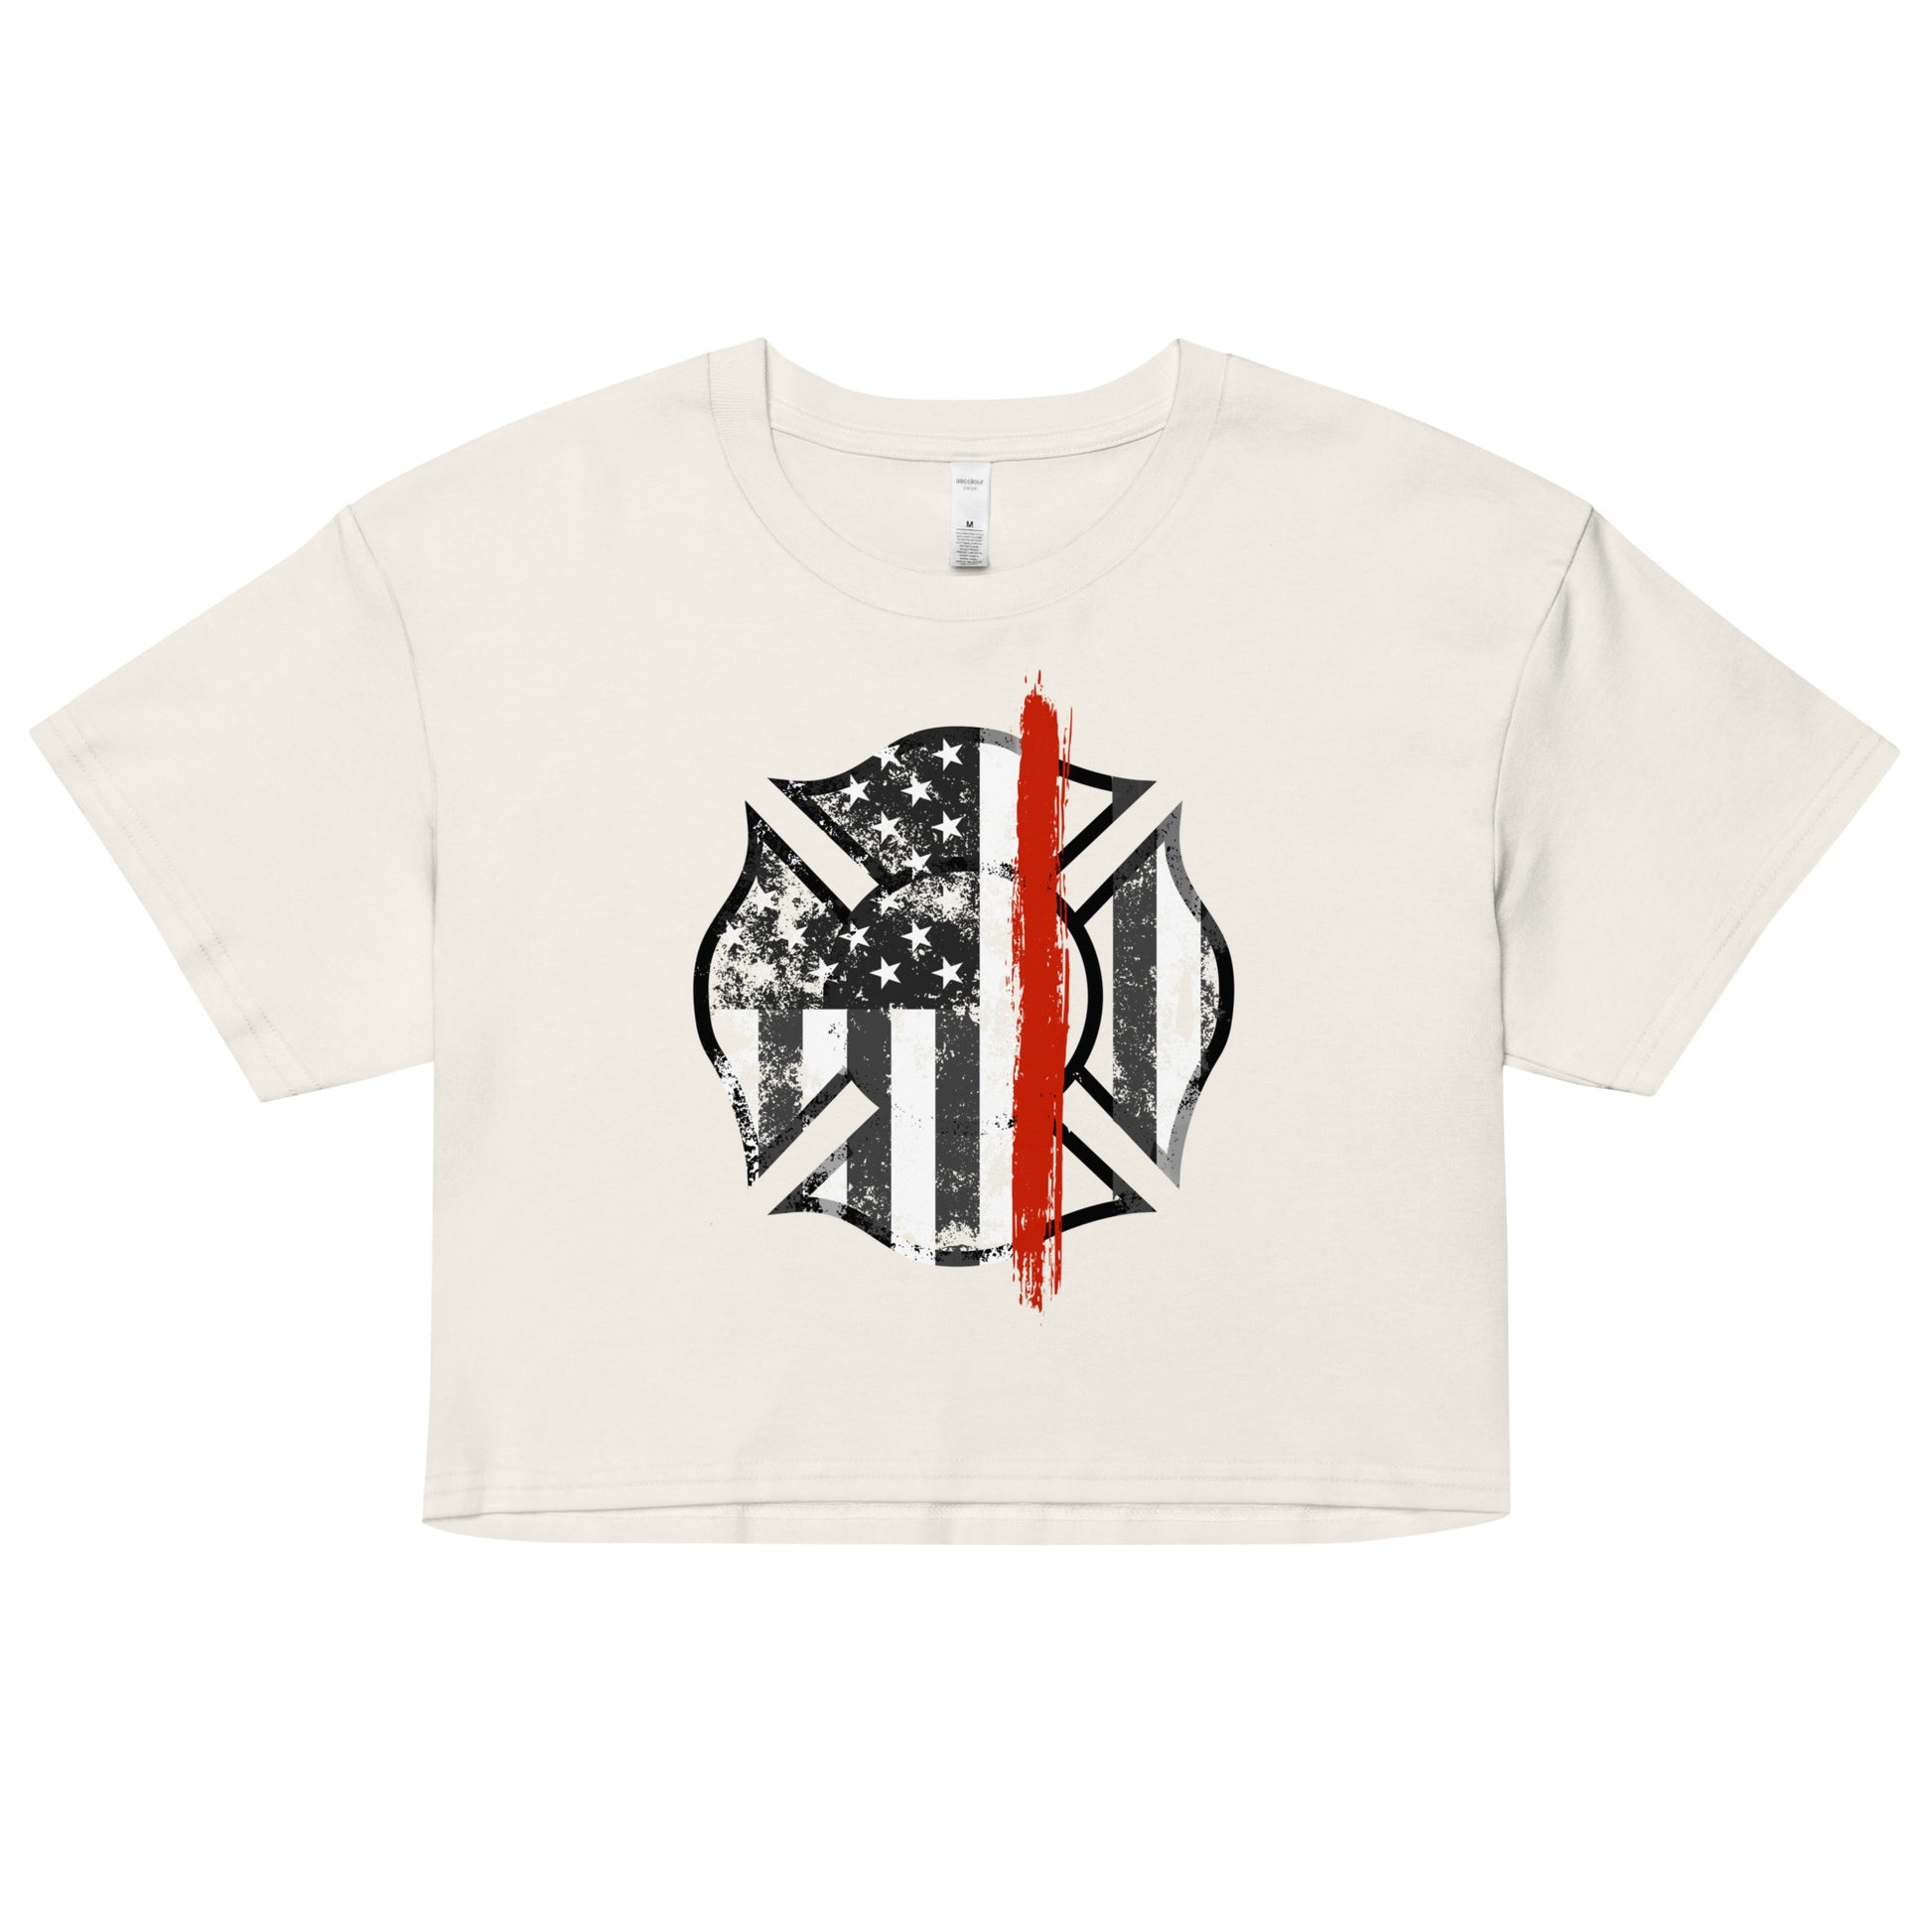 Back the Red women's crop top. Firefighter Thin Red Line shirt in off-white.